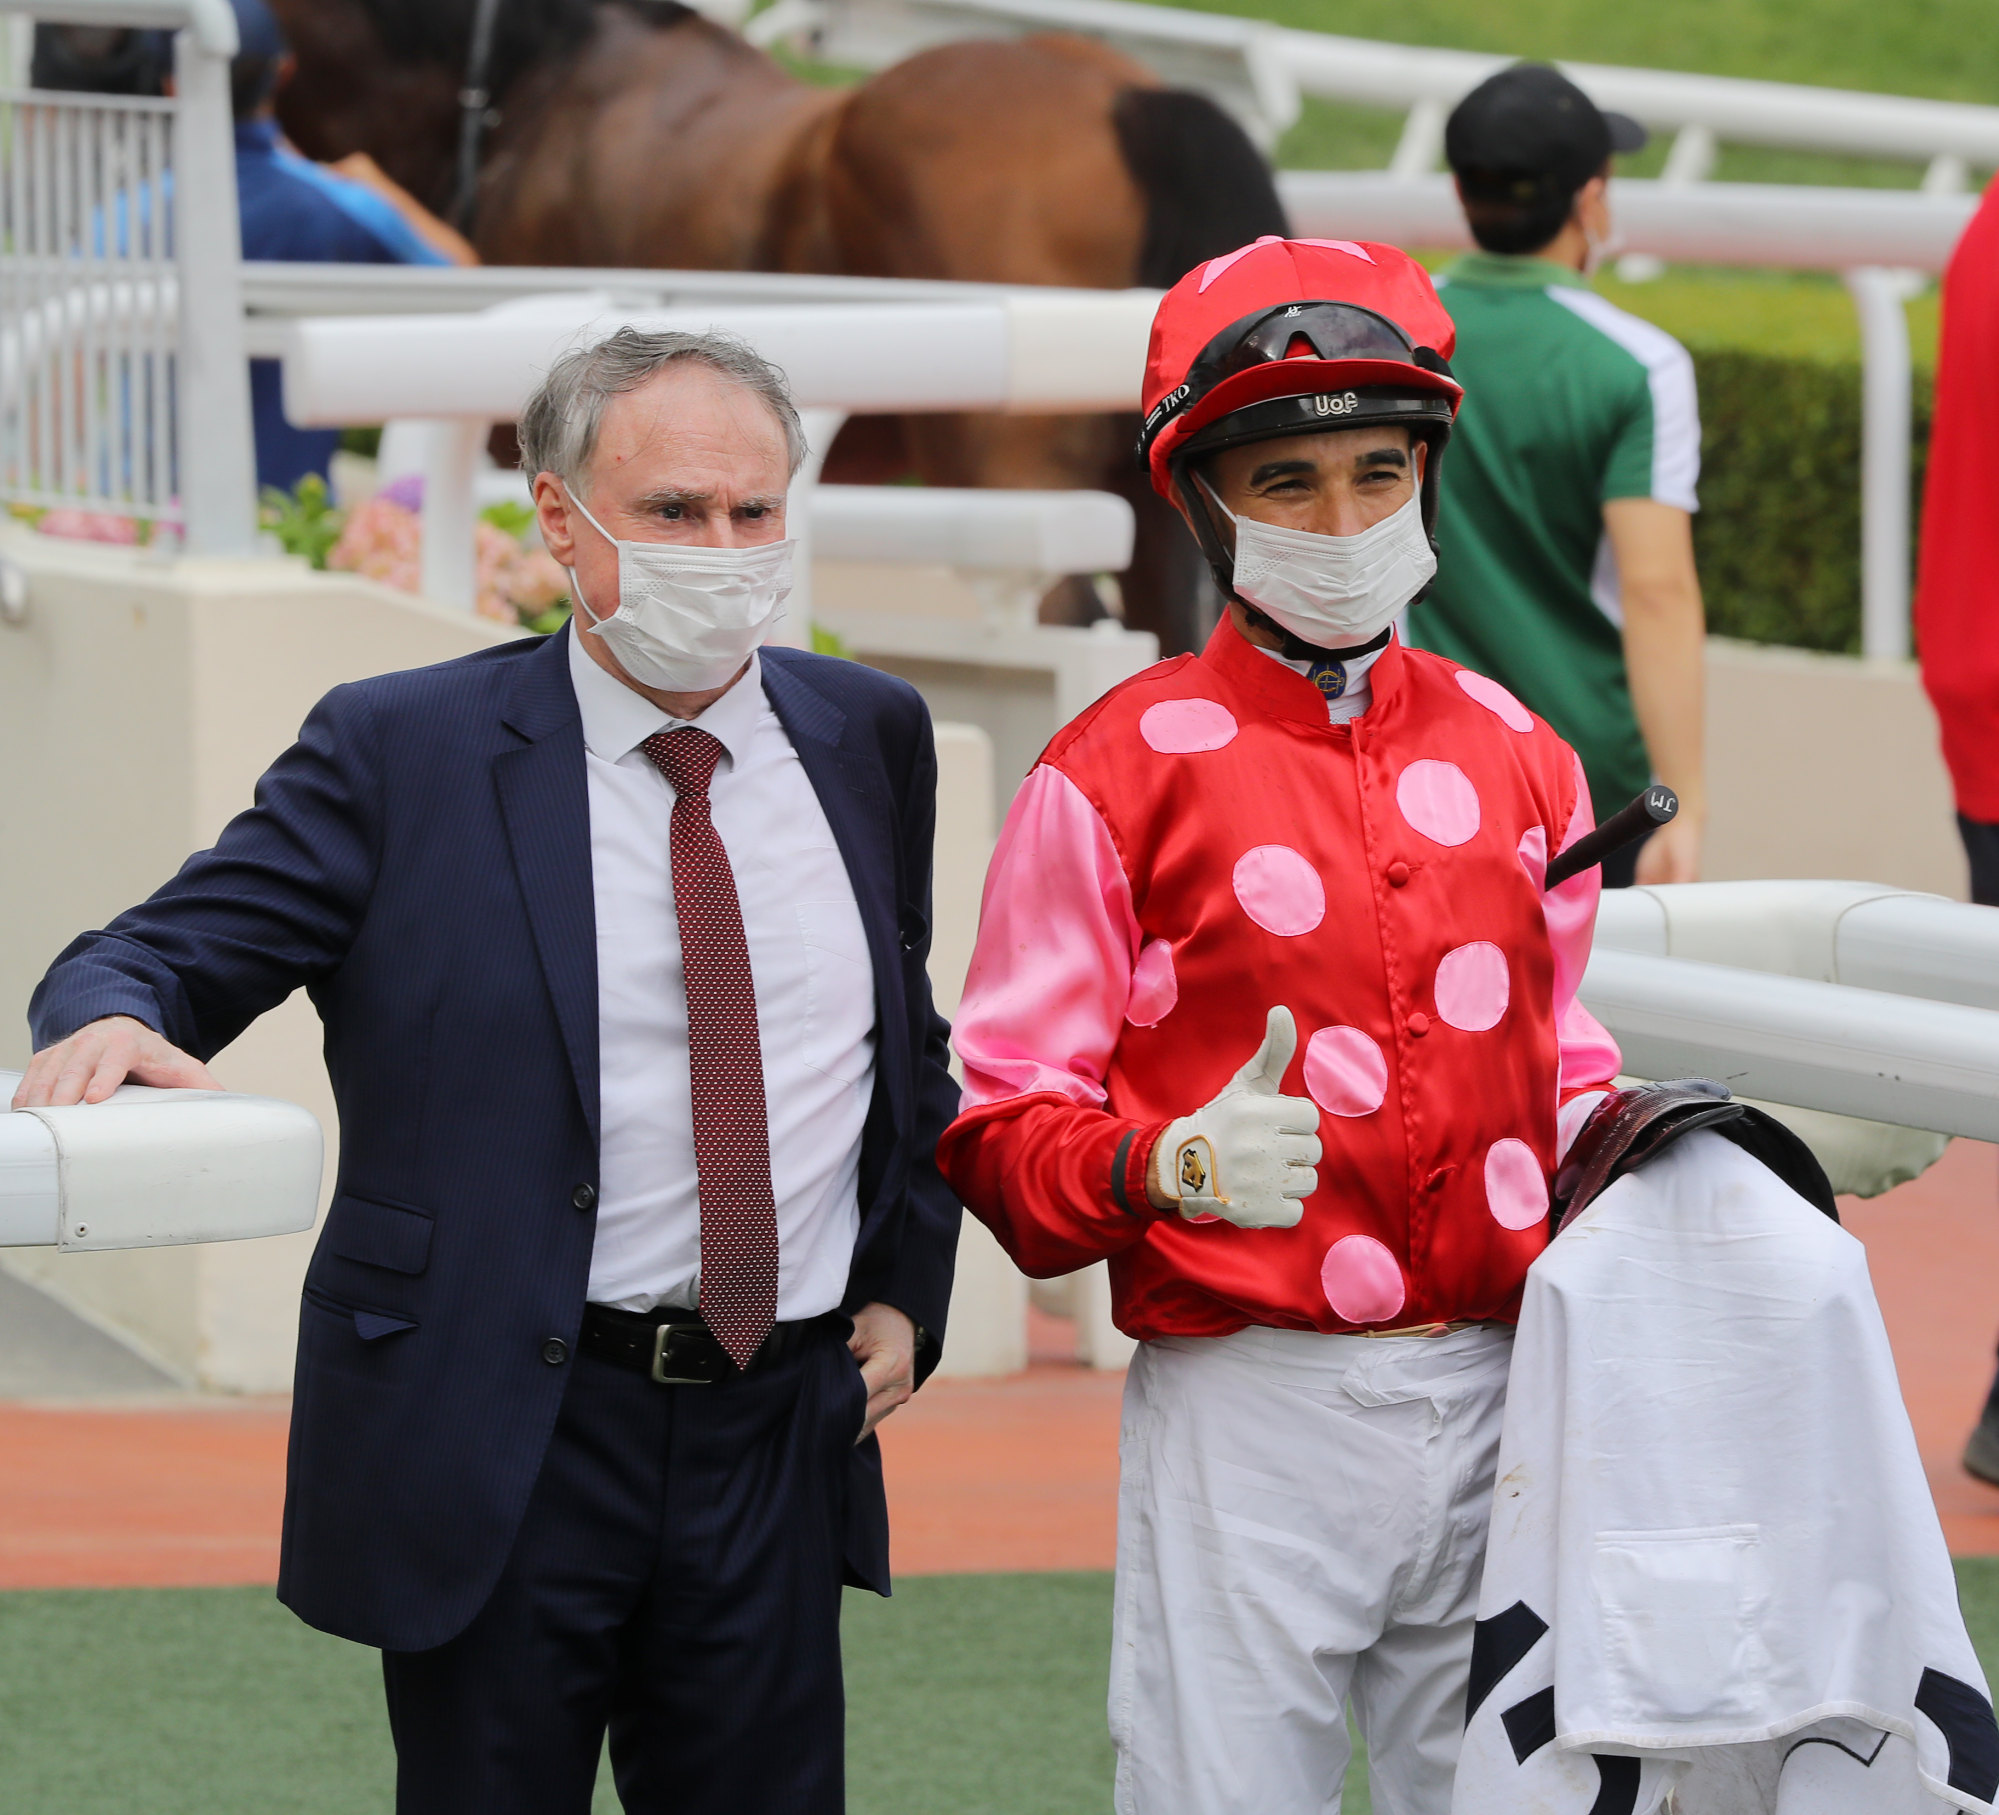 Paul O’Sullivan and Joao Moreira after Stunning Impact’s win in May.